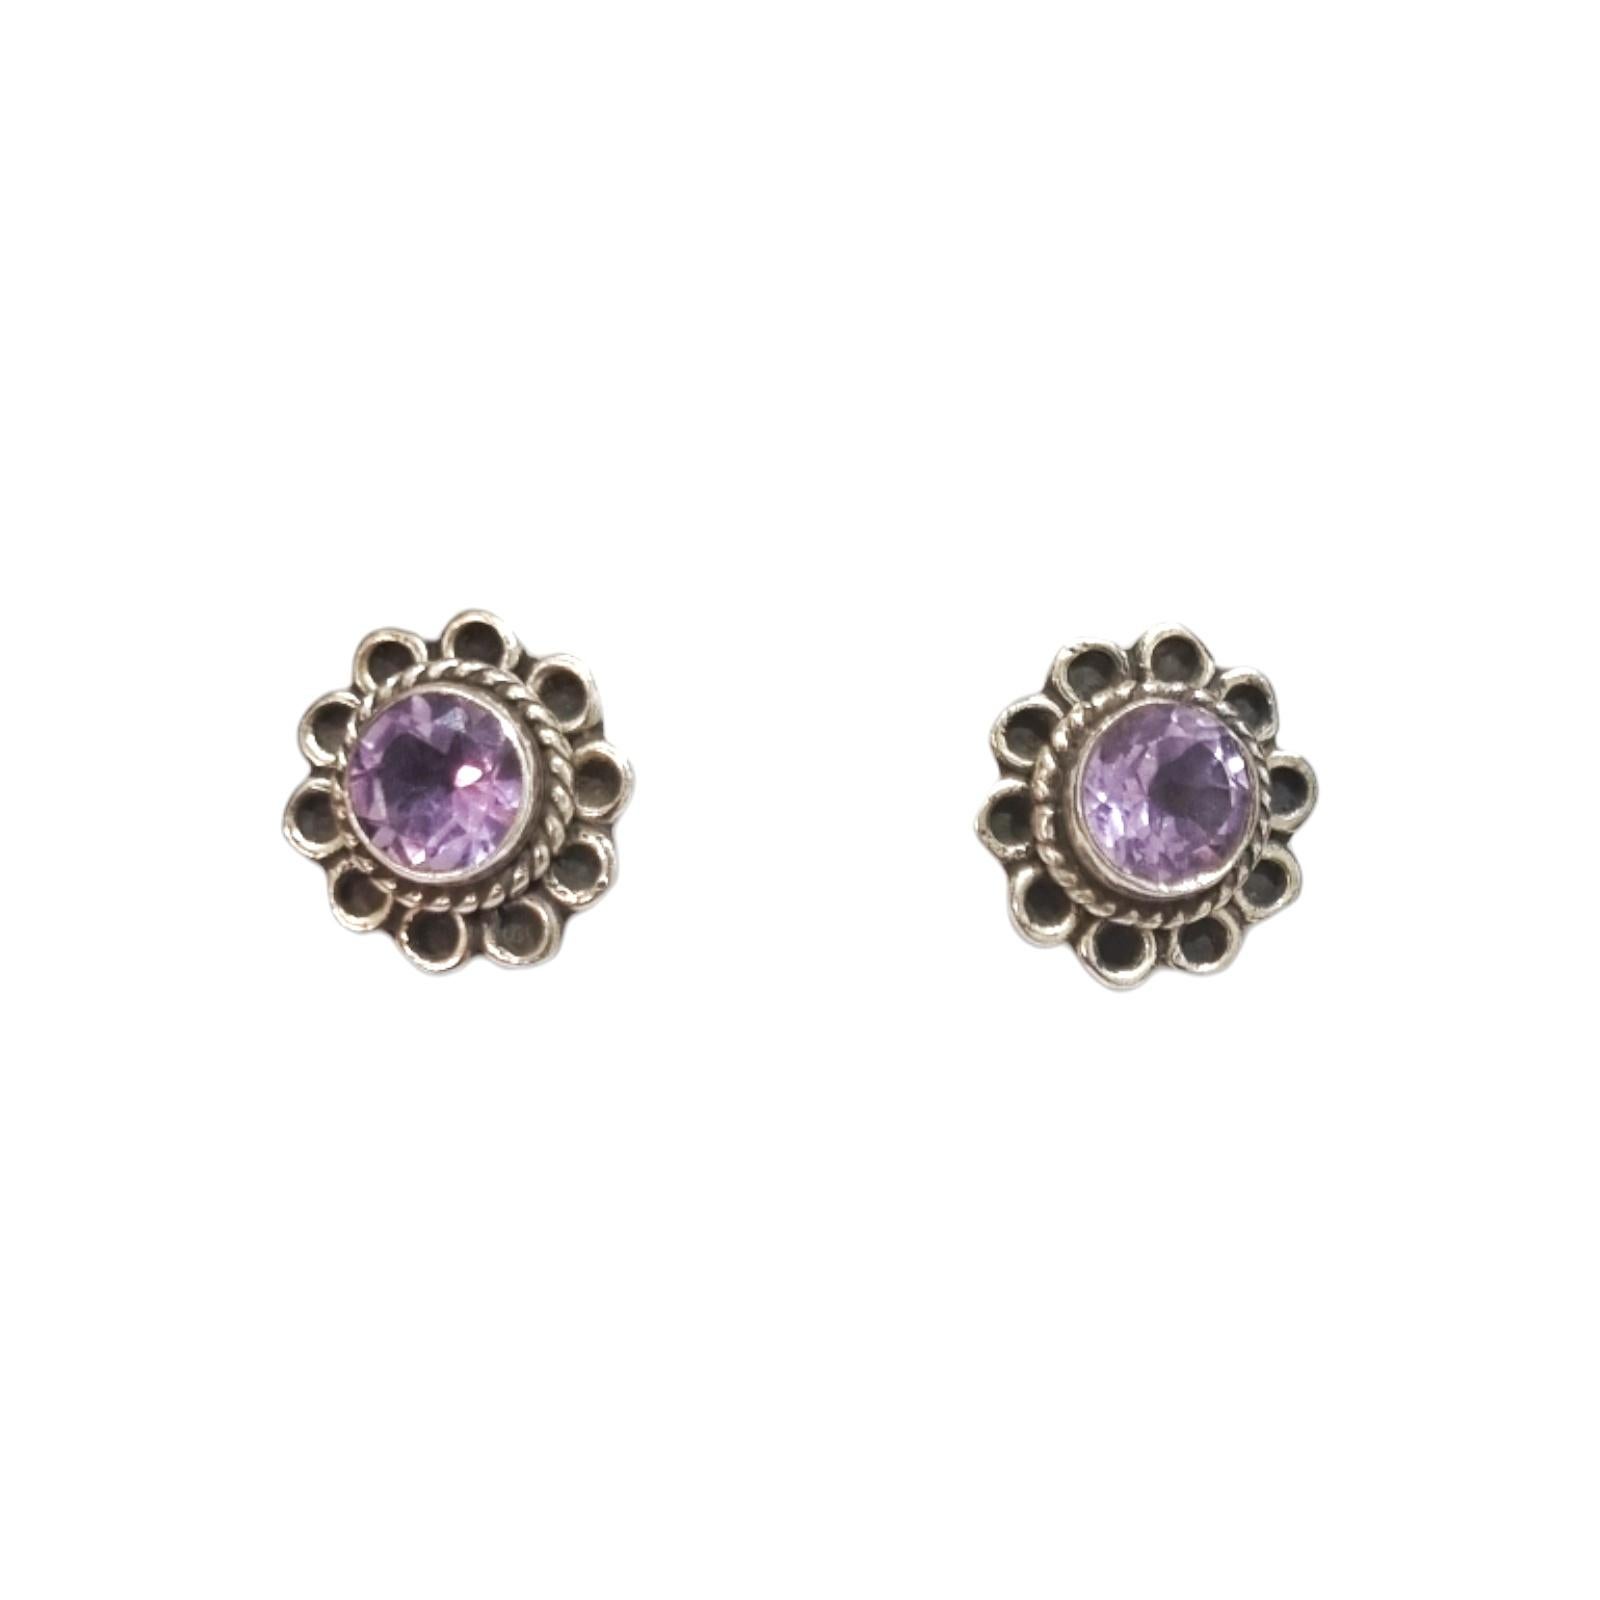 Round Cut Amethyst floral earrings For Sale